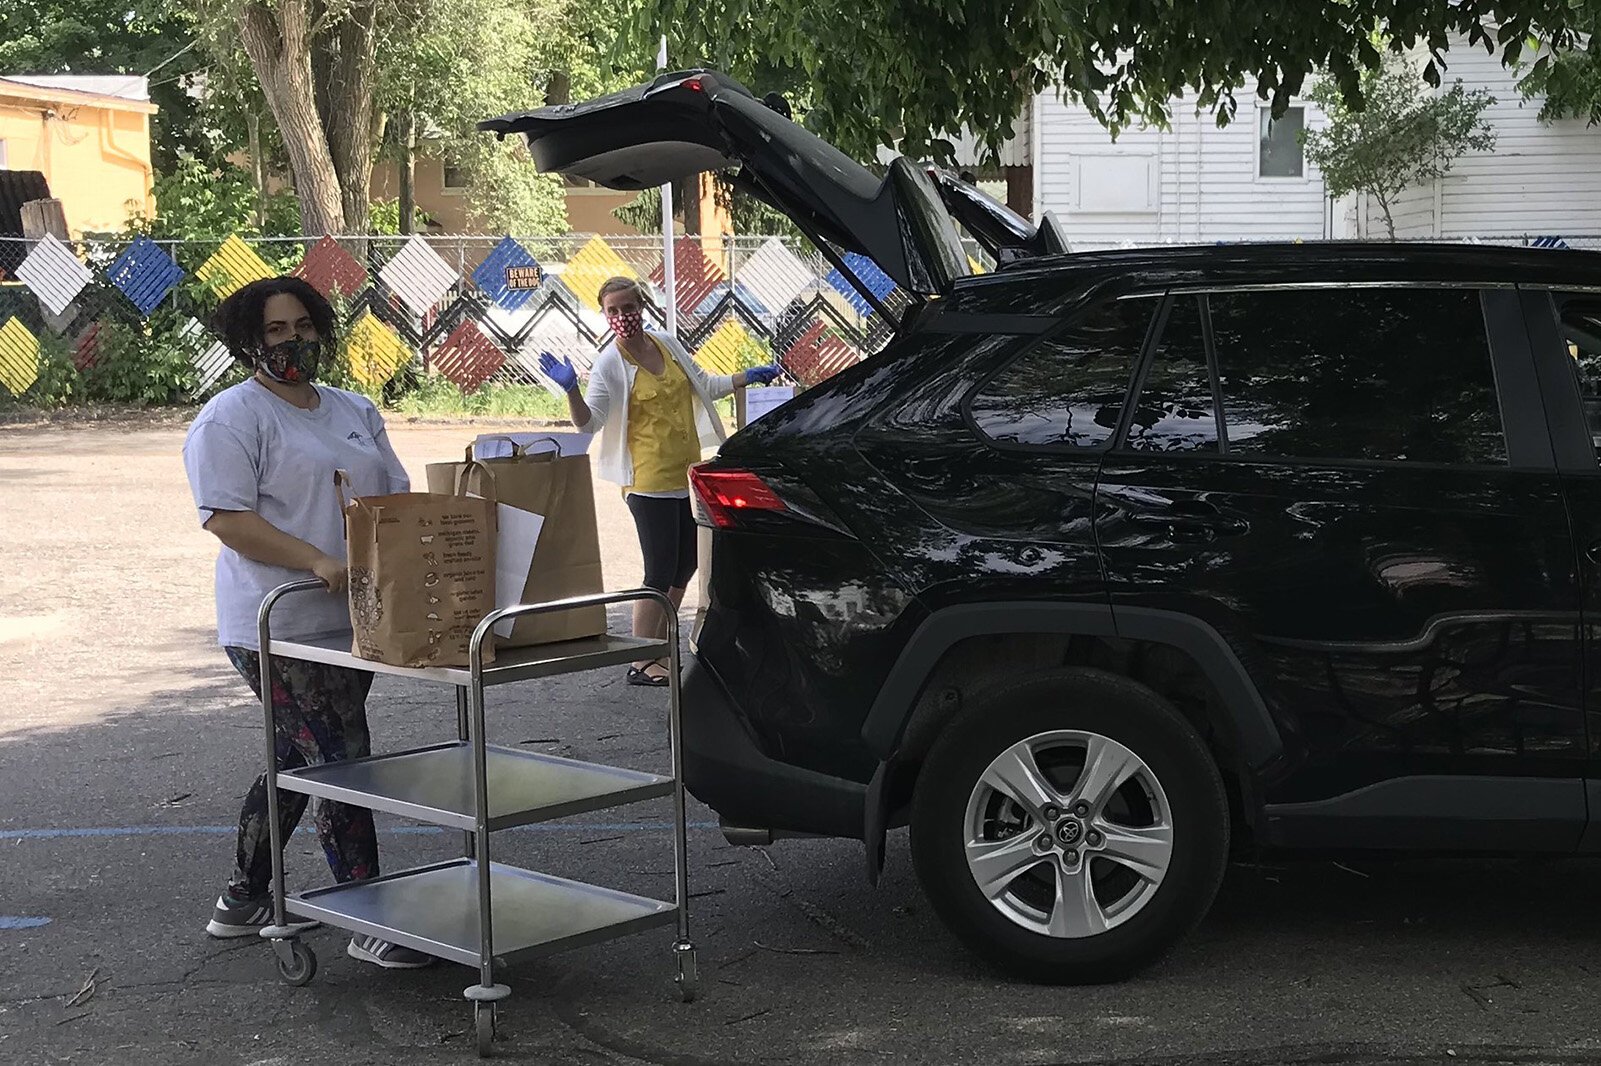 Growing Hope staff have been using a contactless system to transfer groceries to customers' cars at the Ypsilanti Farmers Market.